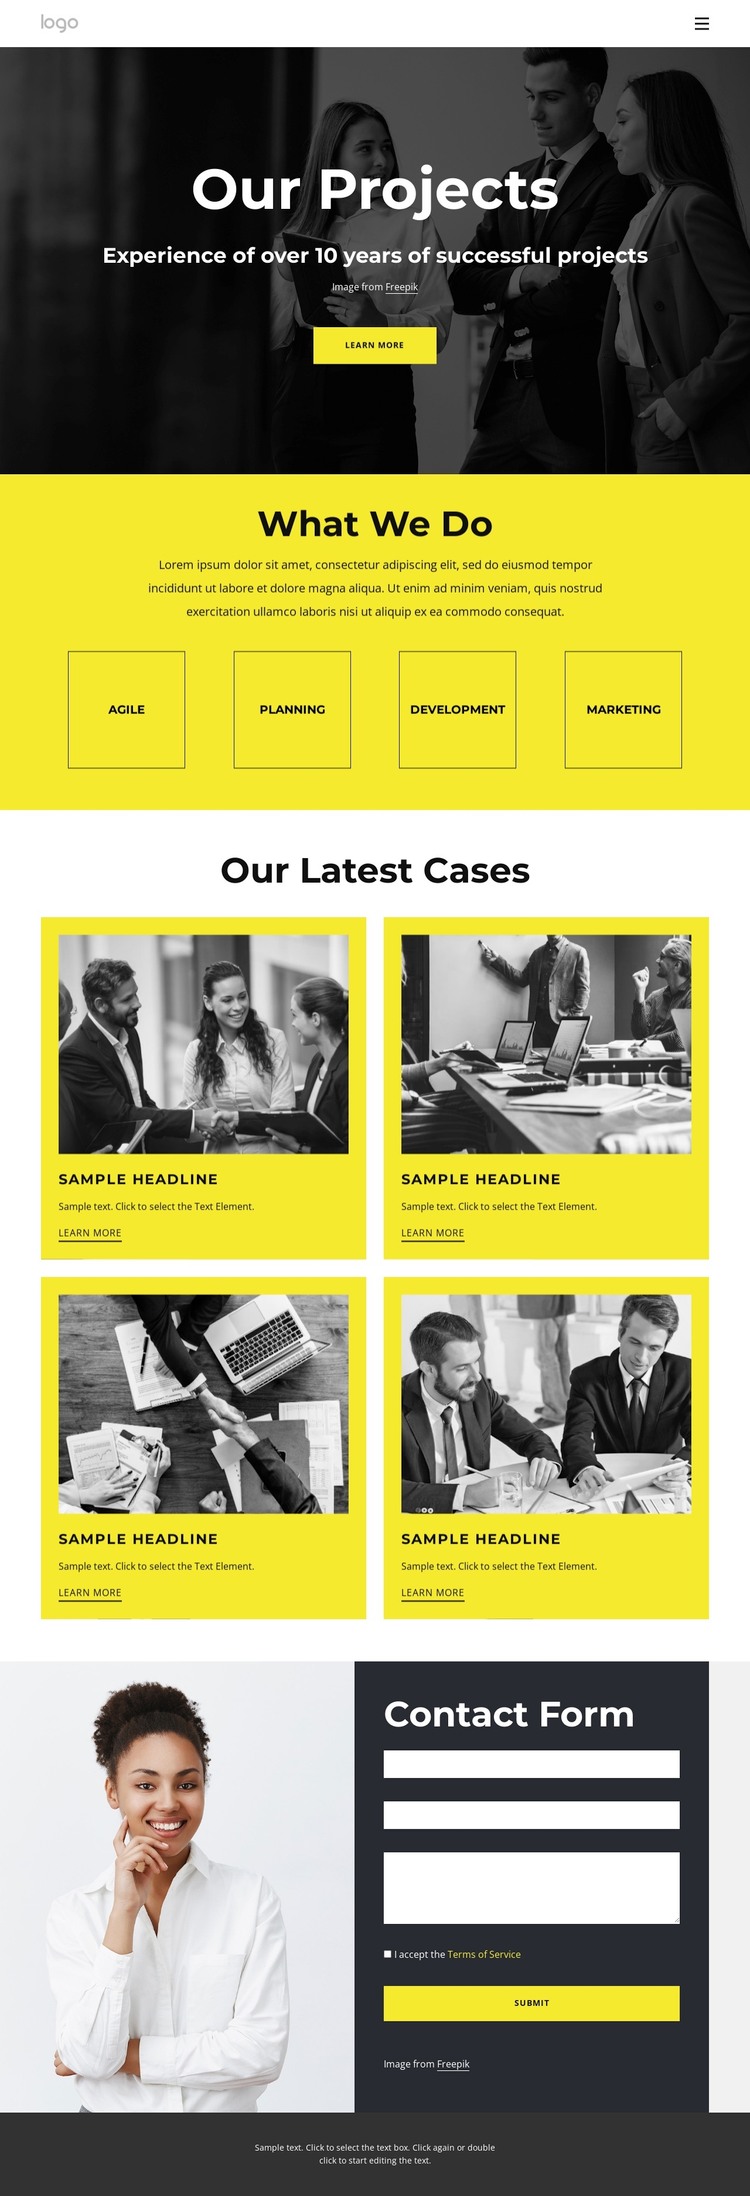 Our consulting success stories WordPress Theme